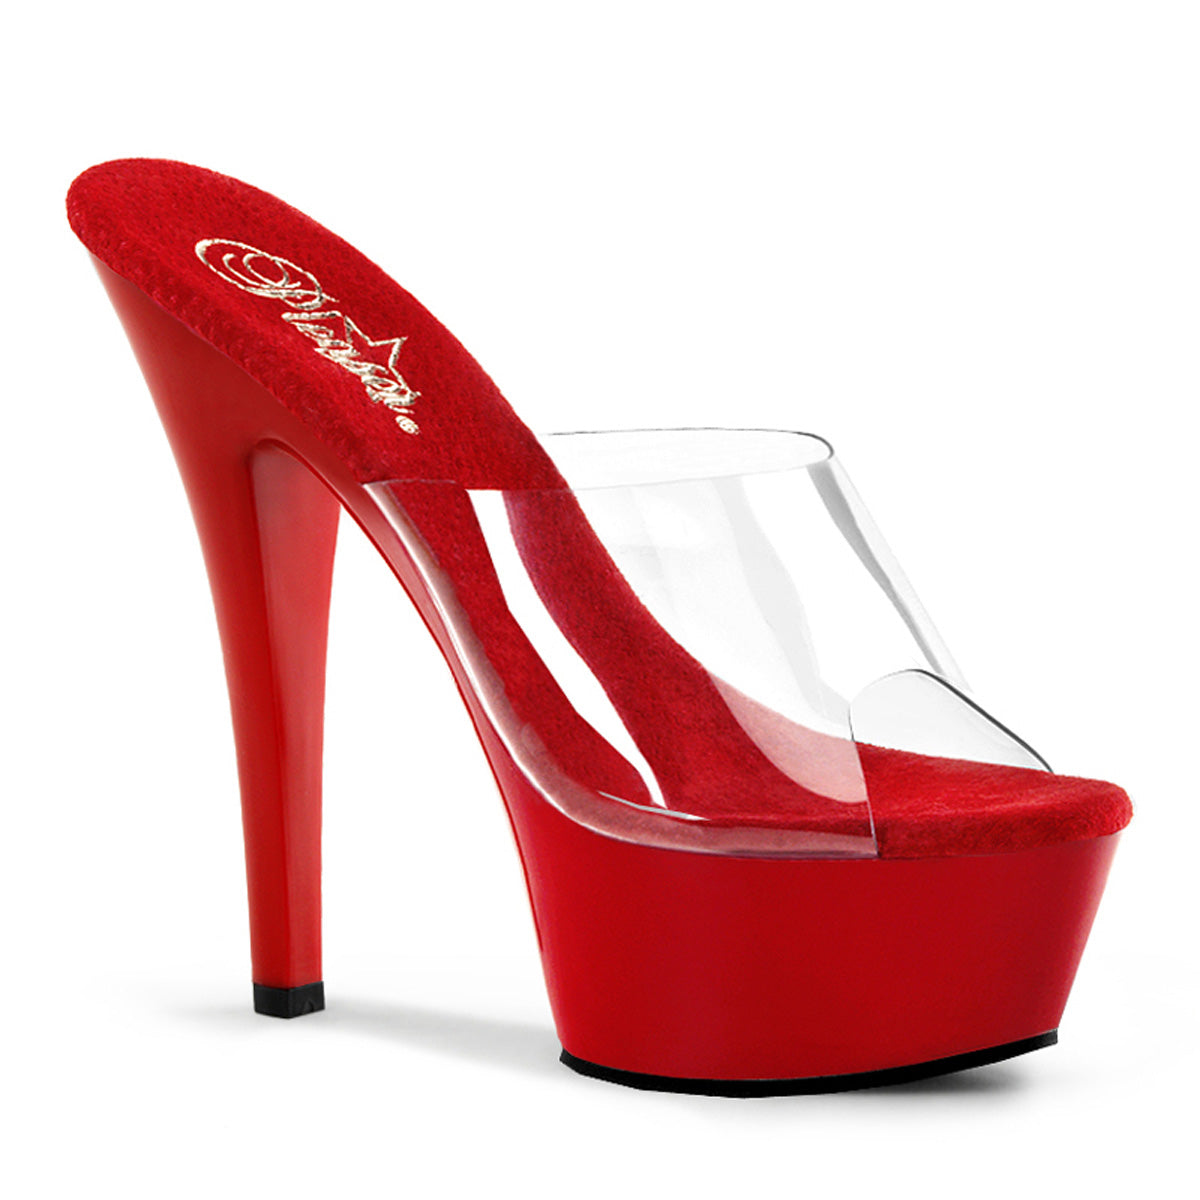 KISS-201 please 6 "Heel Clear and Red Pole Dancing Platform